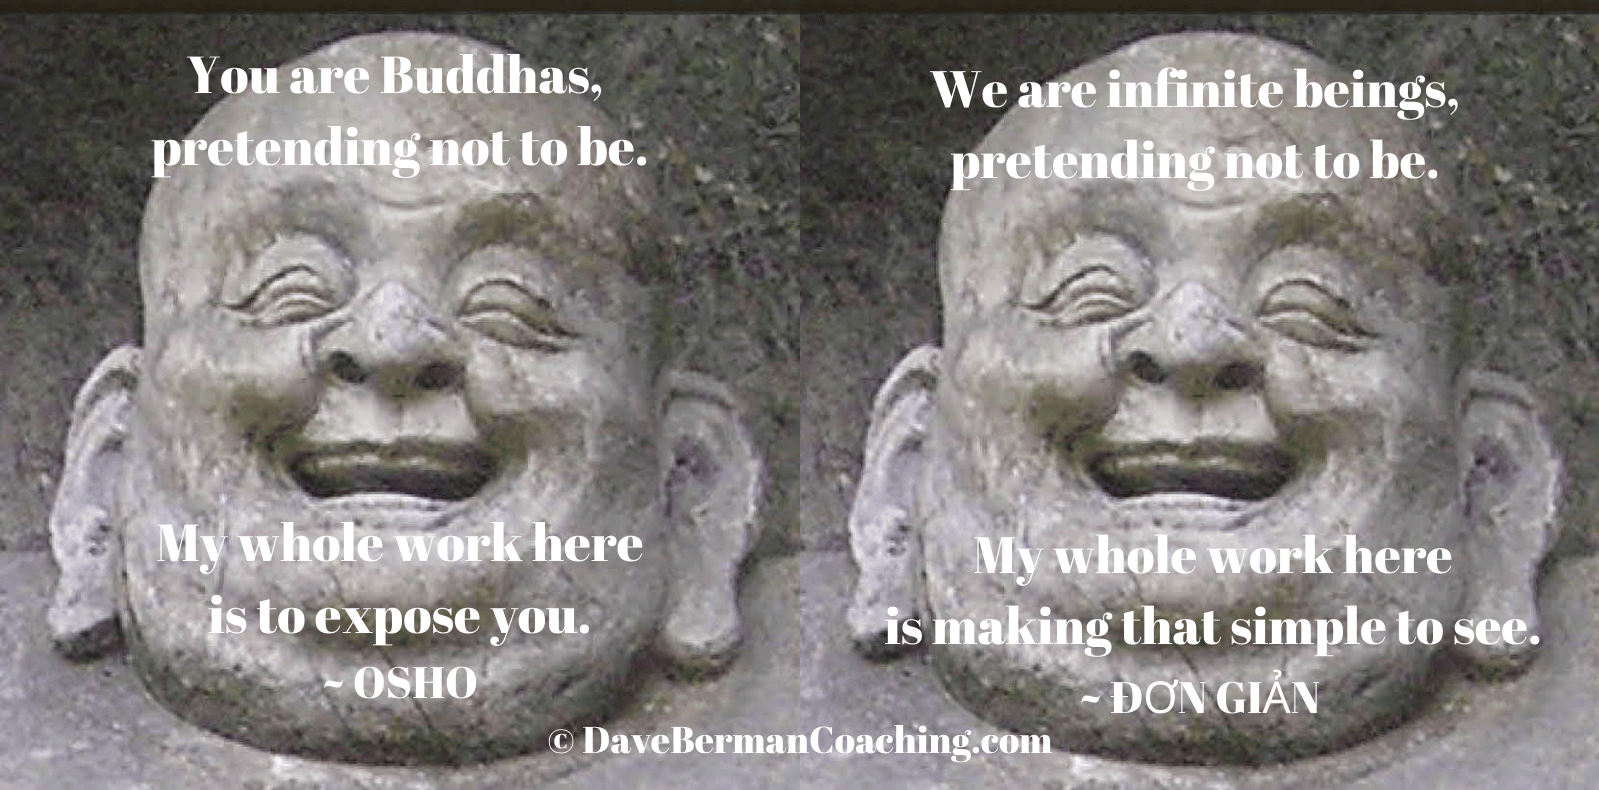 Side by side smiling Buddhas with similar quotes. On the left, from Osho: "You are Buddhas, pretending not to be. My whole work here is to expose you." On the right, from ĐƠN GIẢN: "We are infinite beings, pretending not to be. My whole work here is making that simple to see."